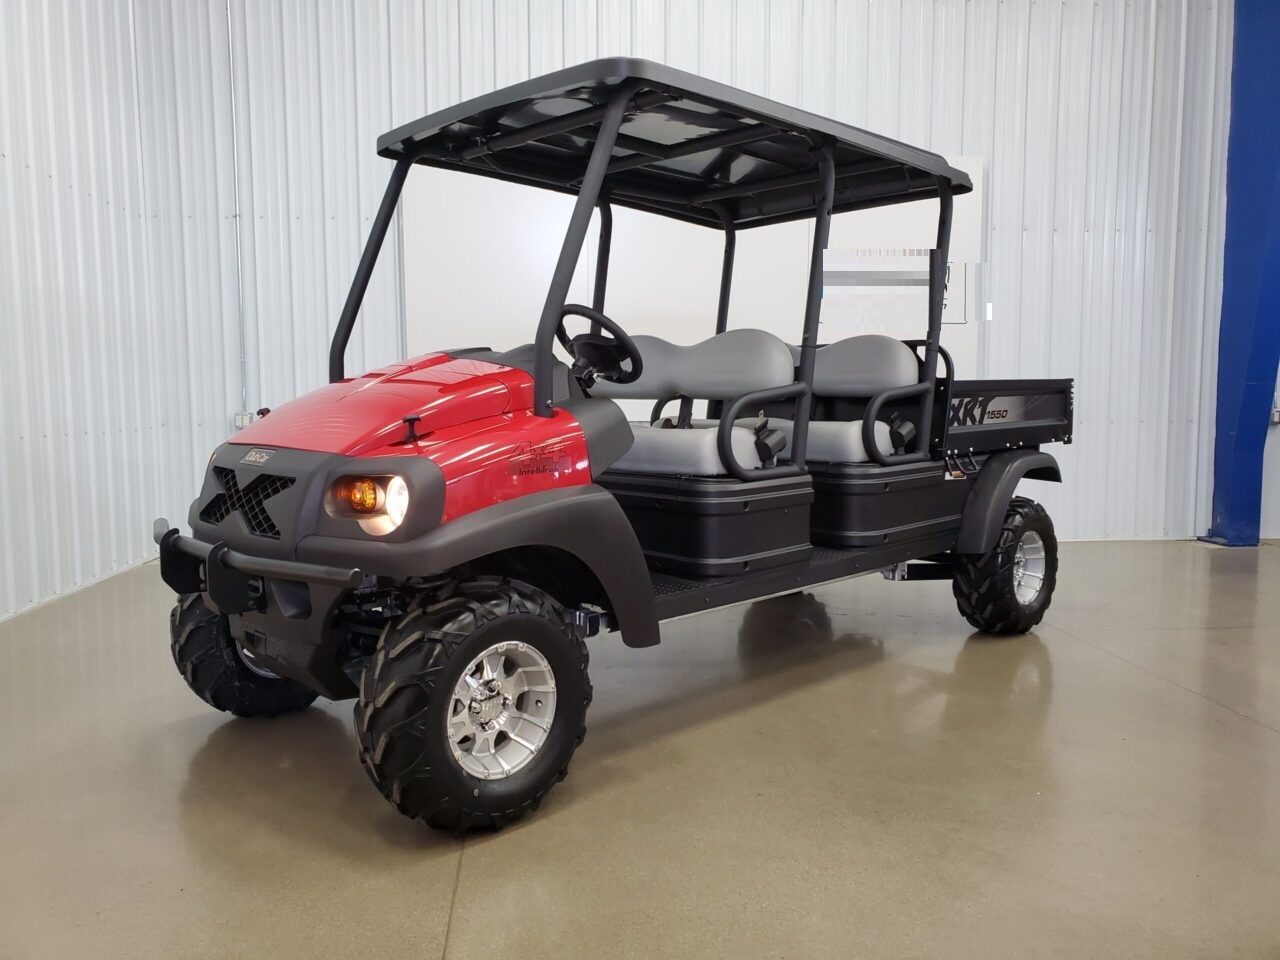 2023 Club Car XRT 1550 SE Diesel Utility Golf Cart Vehicle, Red For Sale